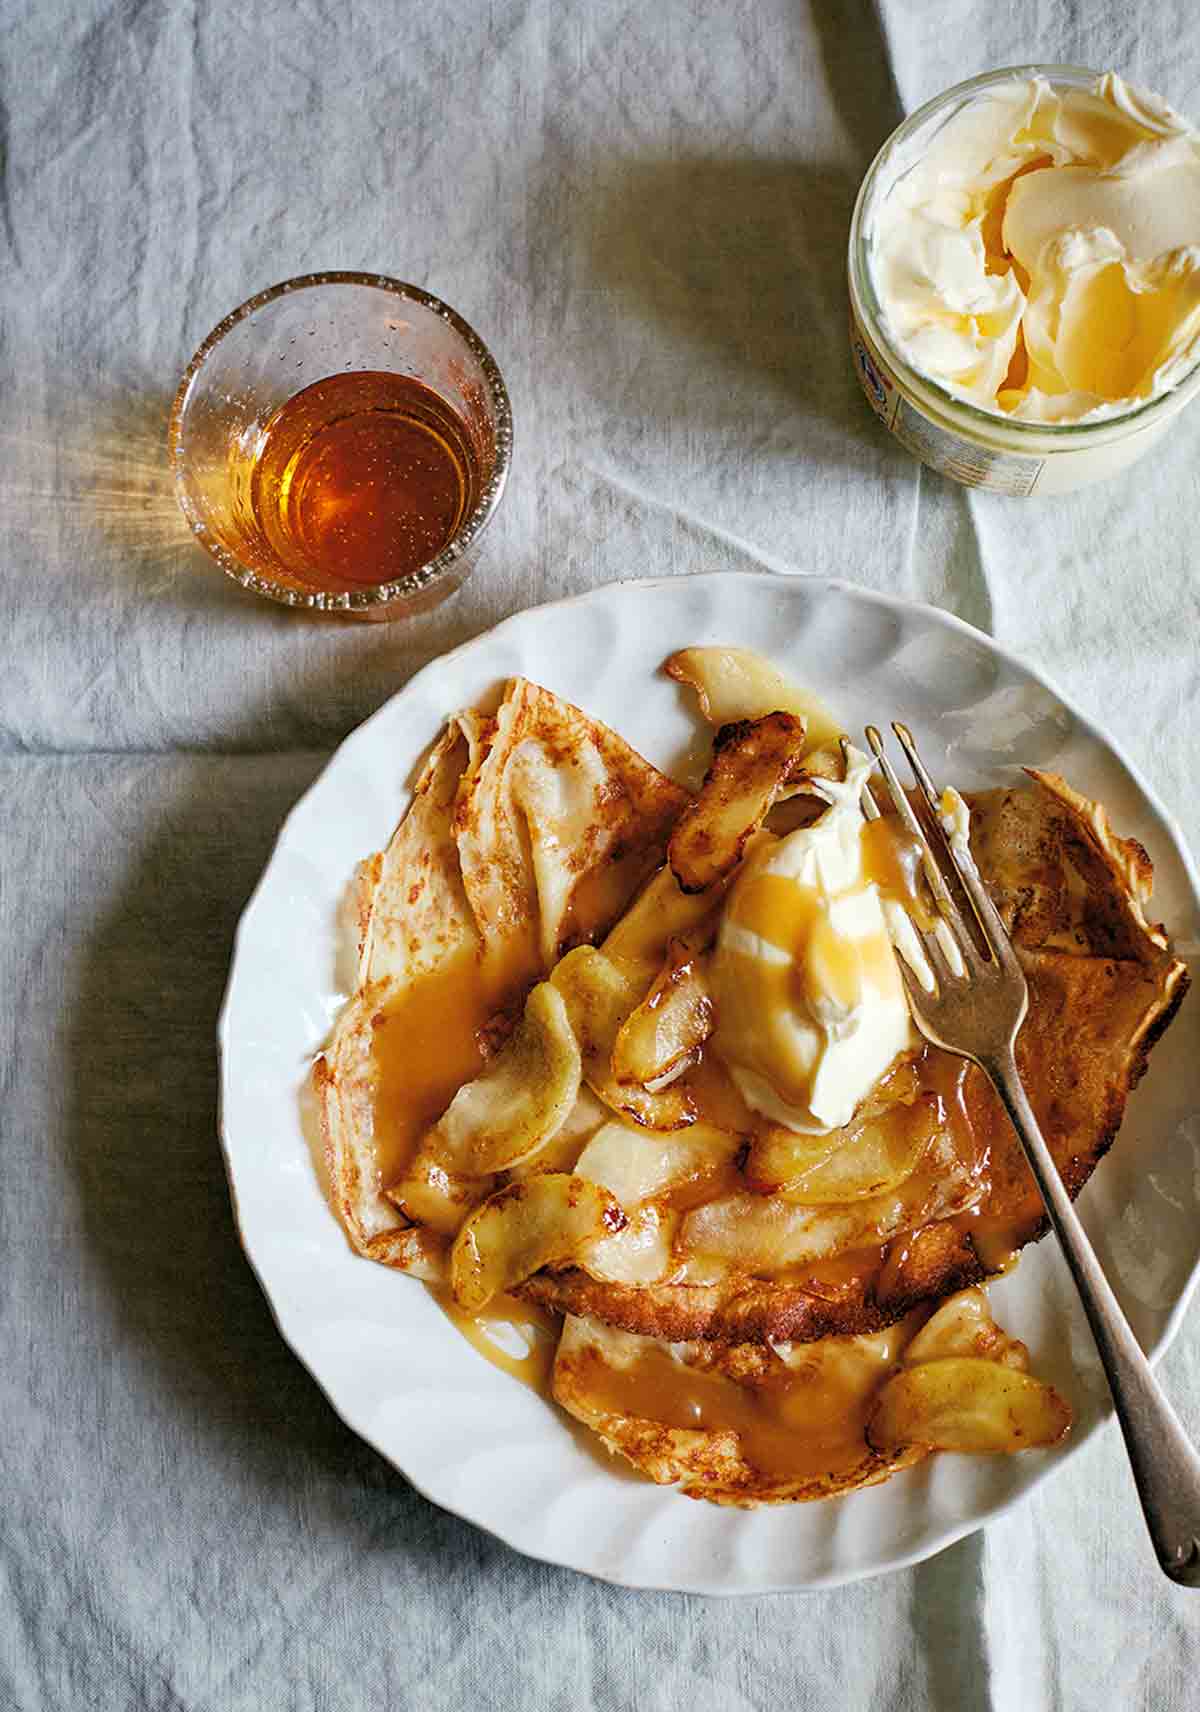 A white plate filled with crêpes dentelles with sautéed apples and caramel sauce